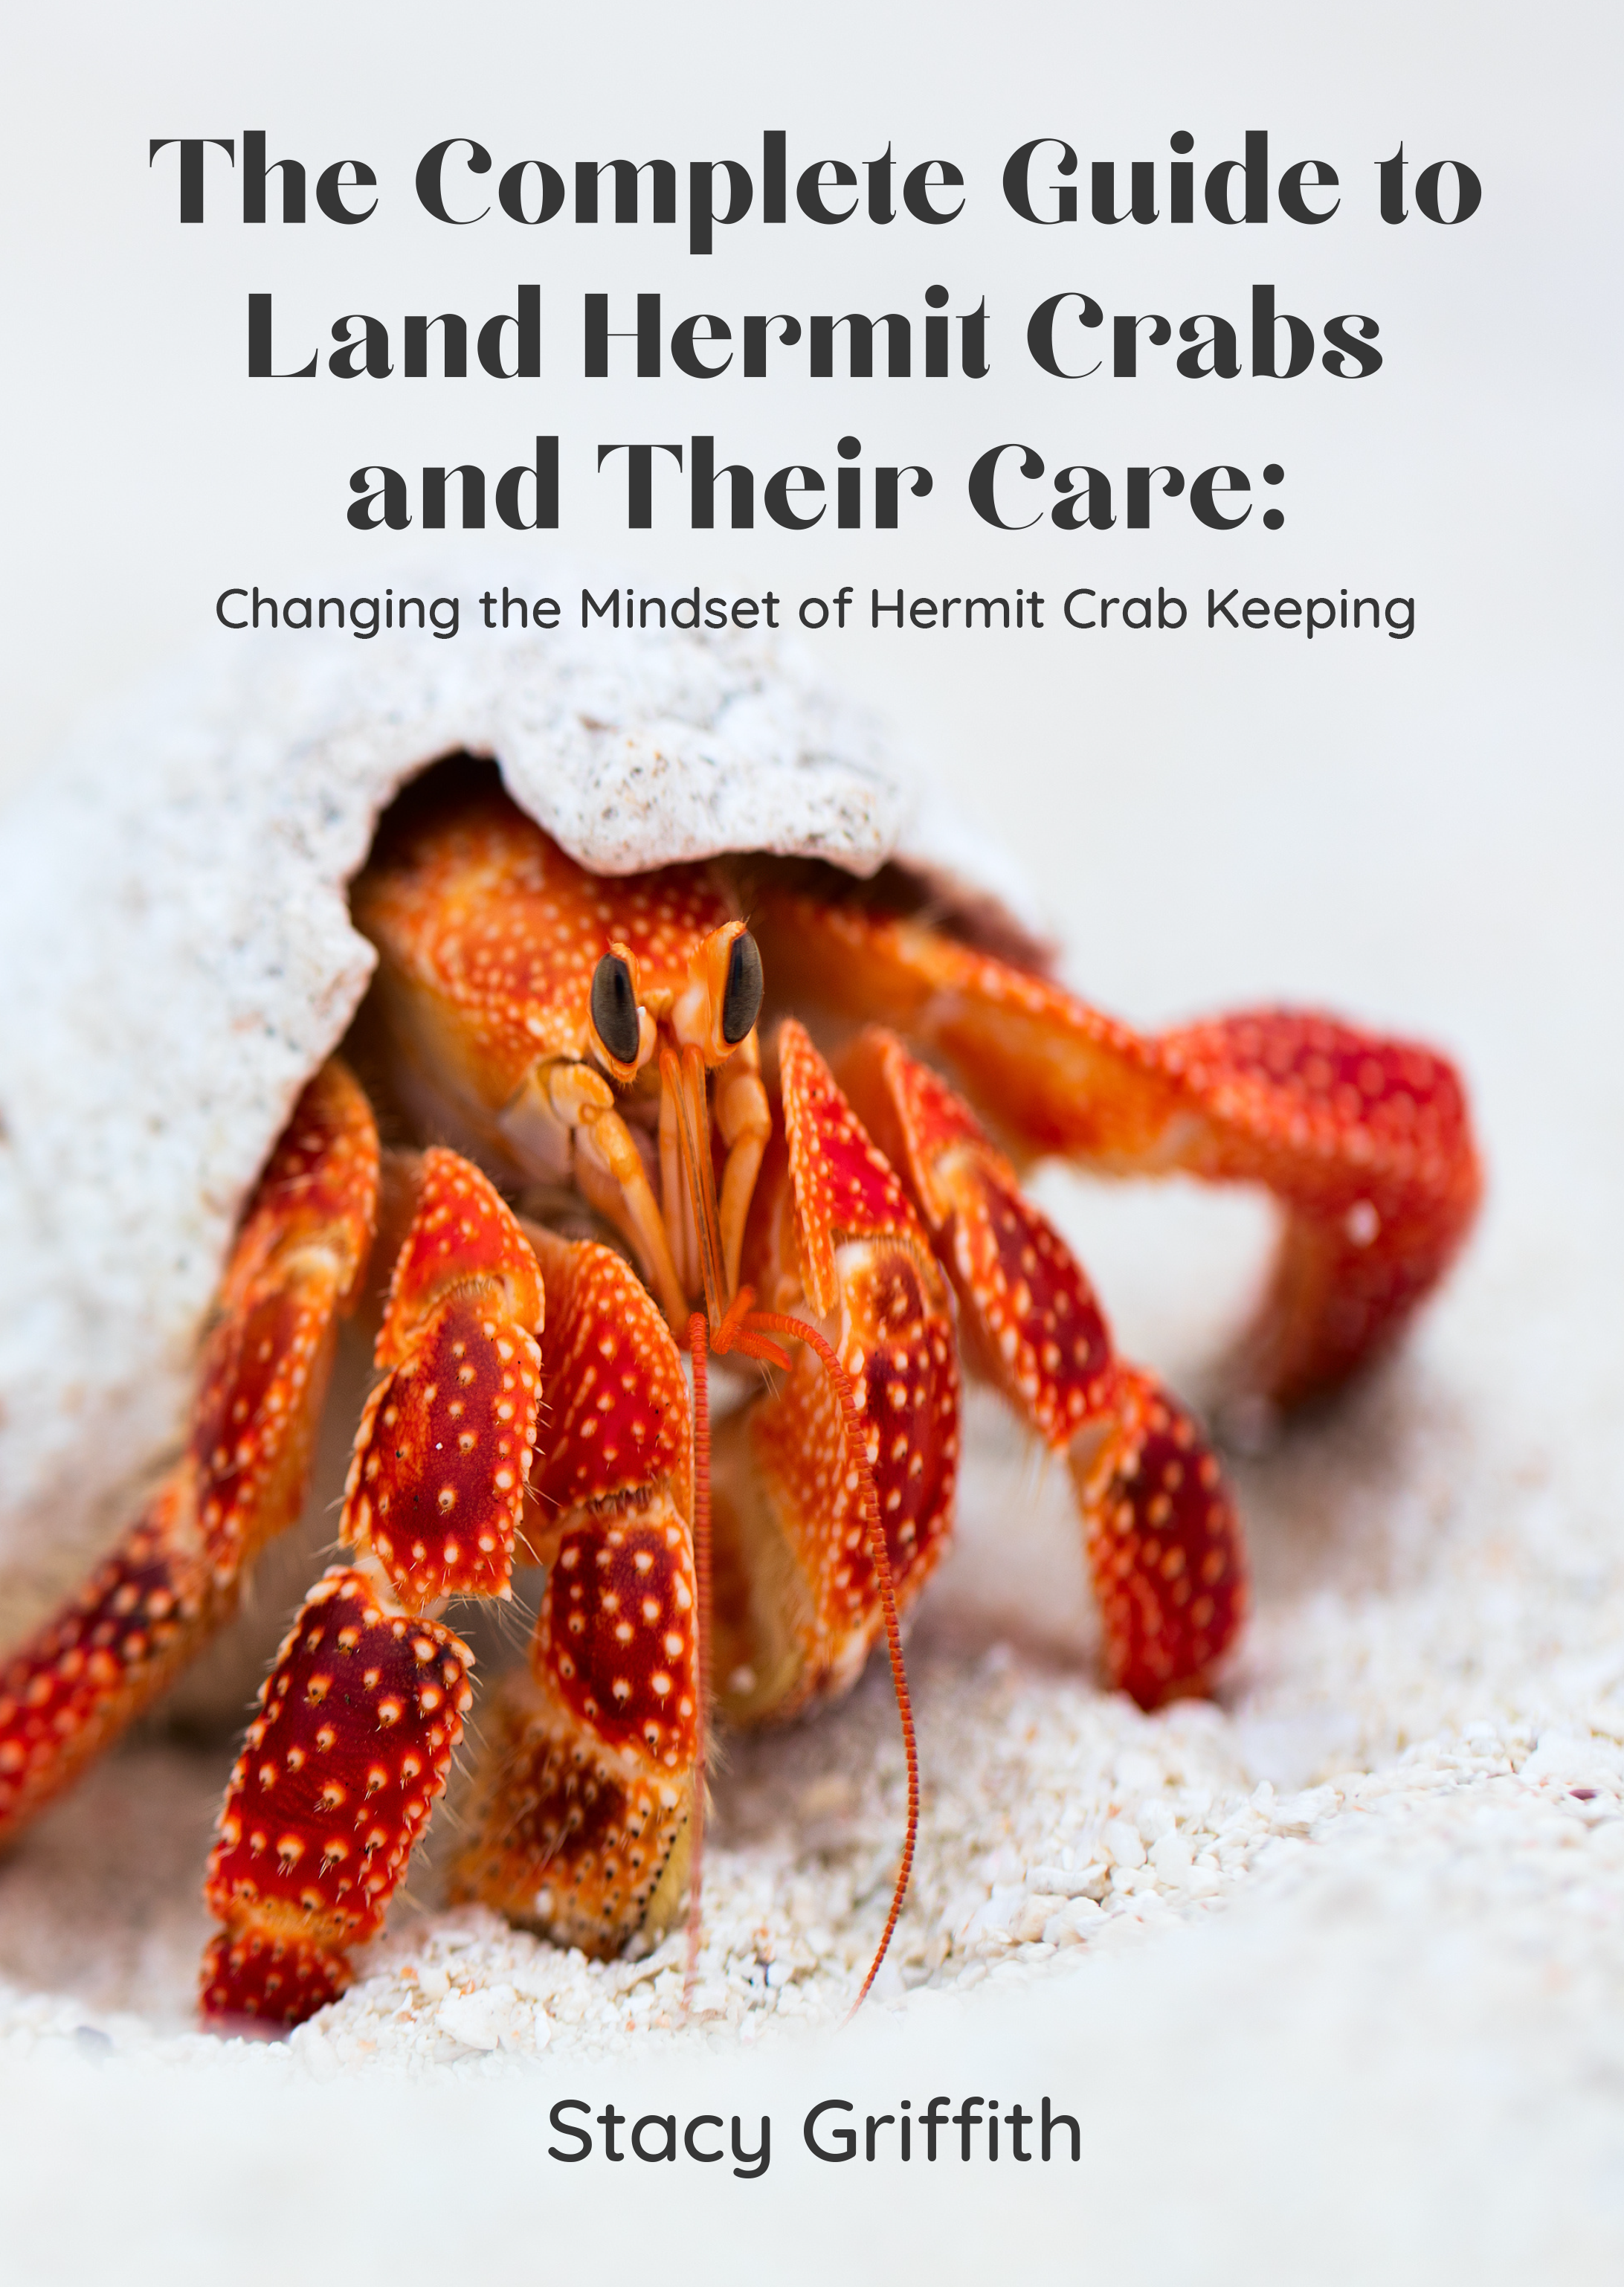 3d book display image of The Complete Guide to Land Hermit Crabs and Their Care: Changing the Mindset of Hermit Crab Keeping